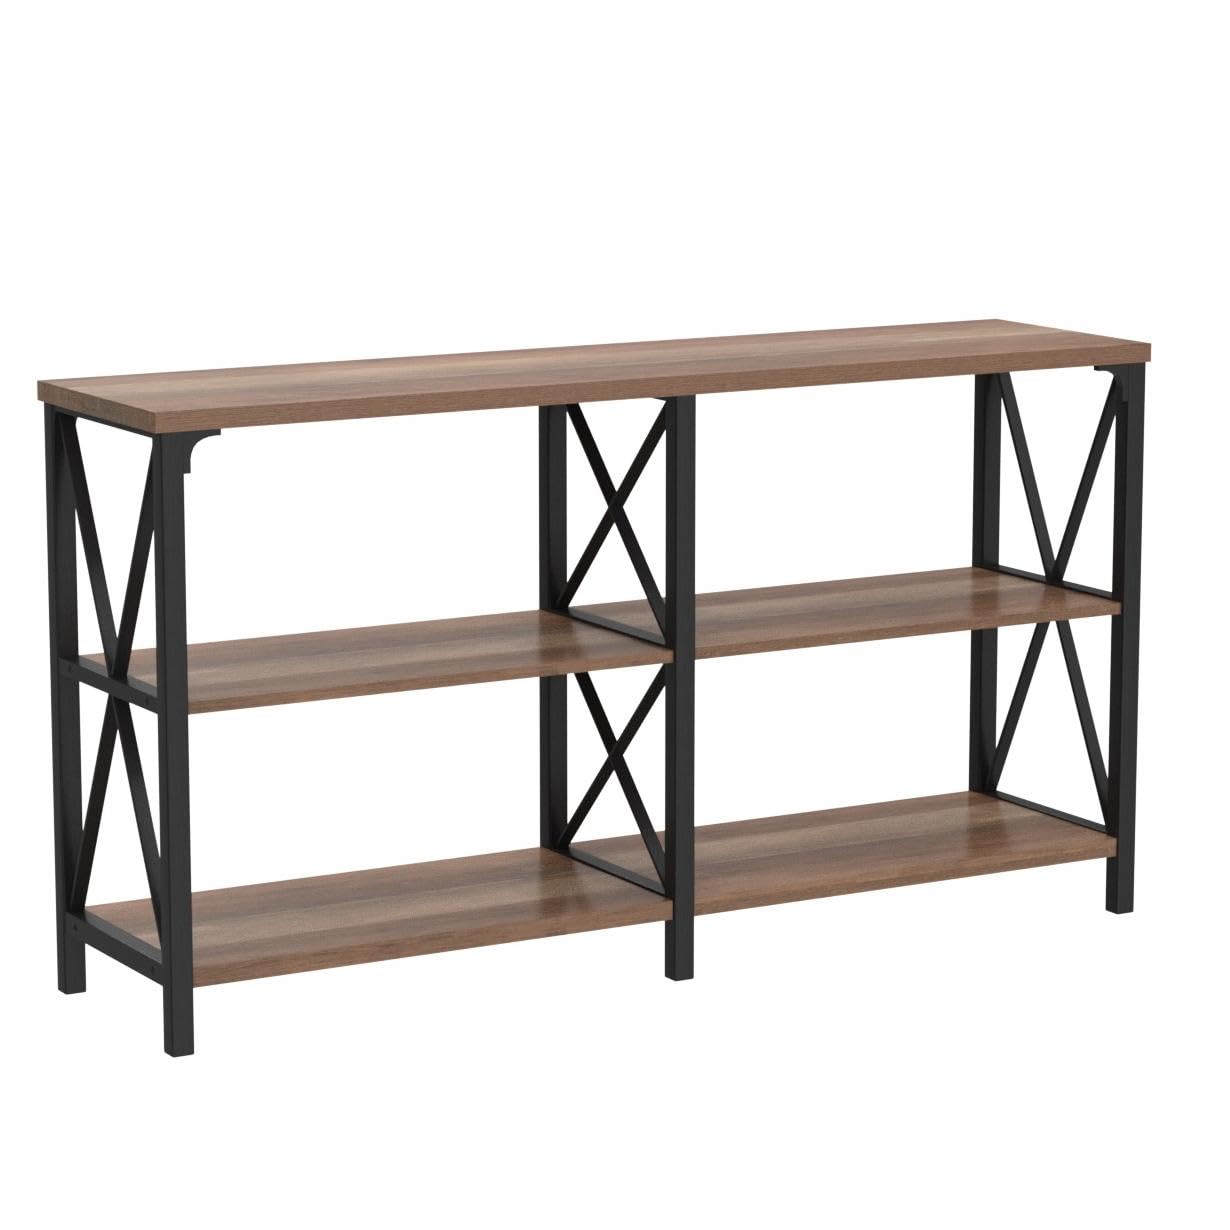 IBF Rustic Console Table, Industrial Wood and Metal Sofa Table, Hallway Entry Table for Home Living Room, Barnwood Foyer Accent Entryway Table with Retro Vintage Storage Shelf, Rustic Oak, 55 Inch